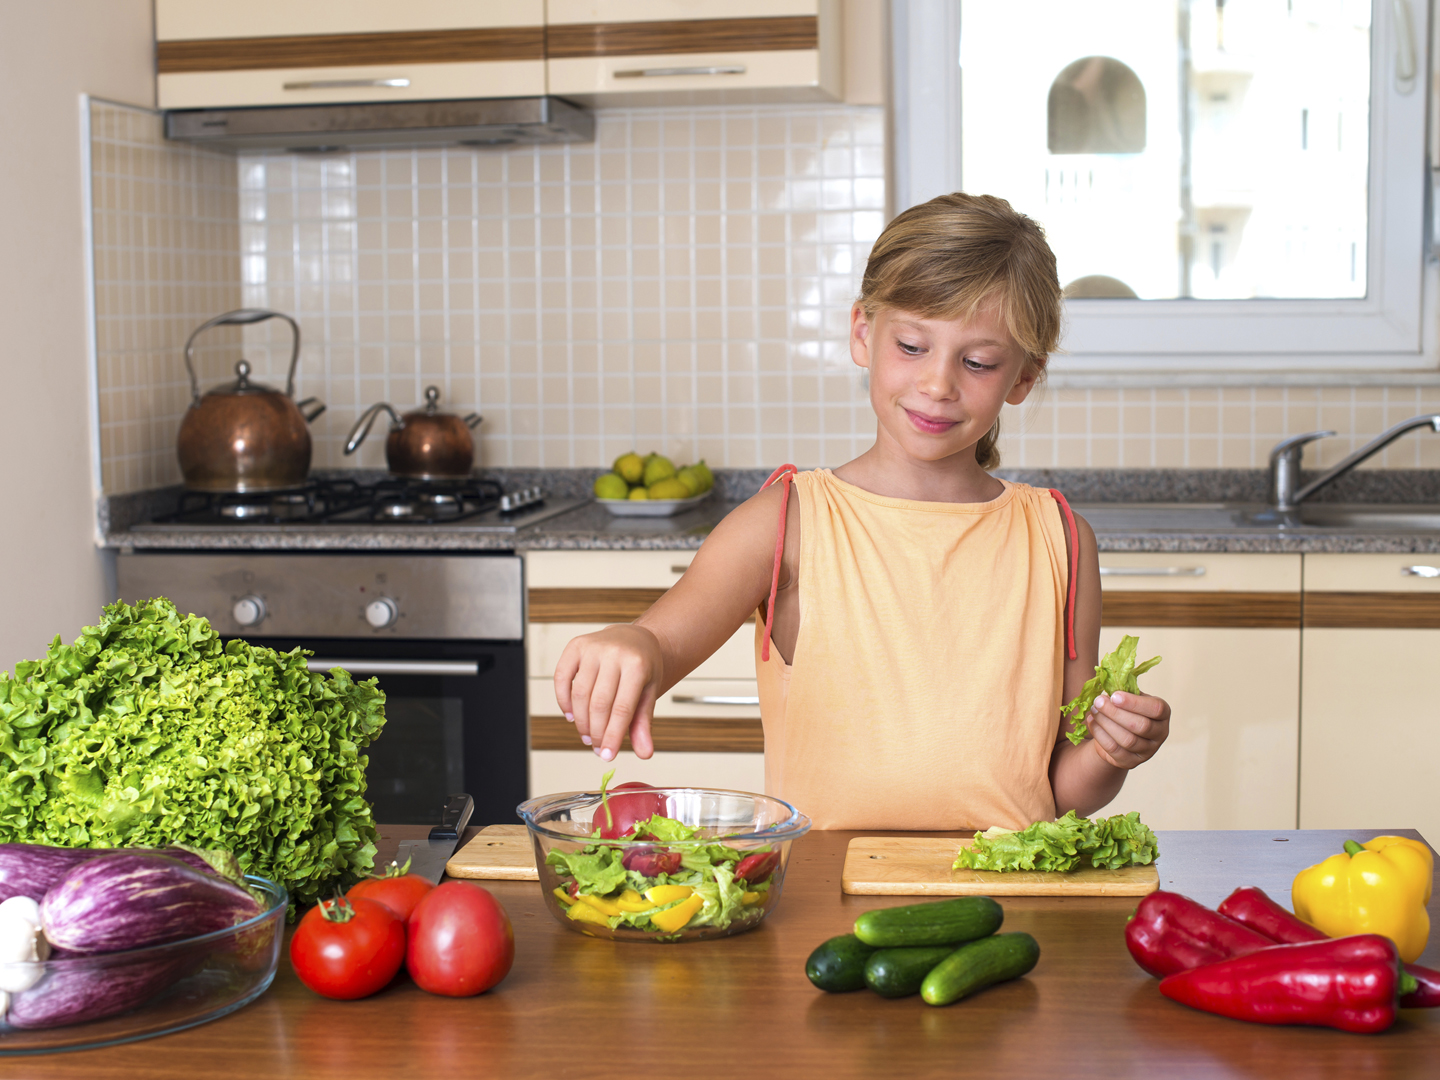 Young Girl Cooking. Healthy Food - Vegetable Salad. Diet. Dieting Concept. Healthy Lifestyle. Cooking At Home. Prepare Food.